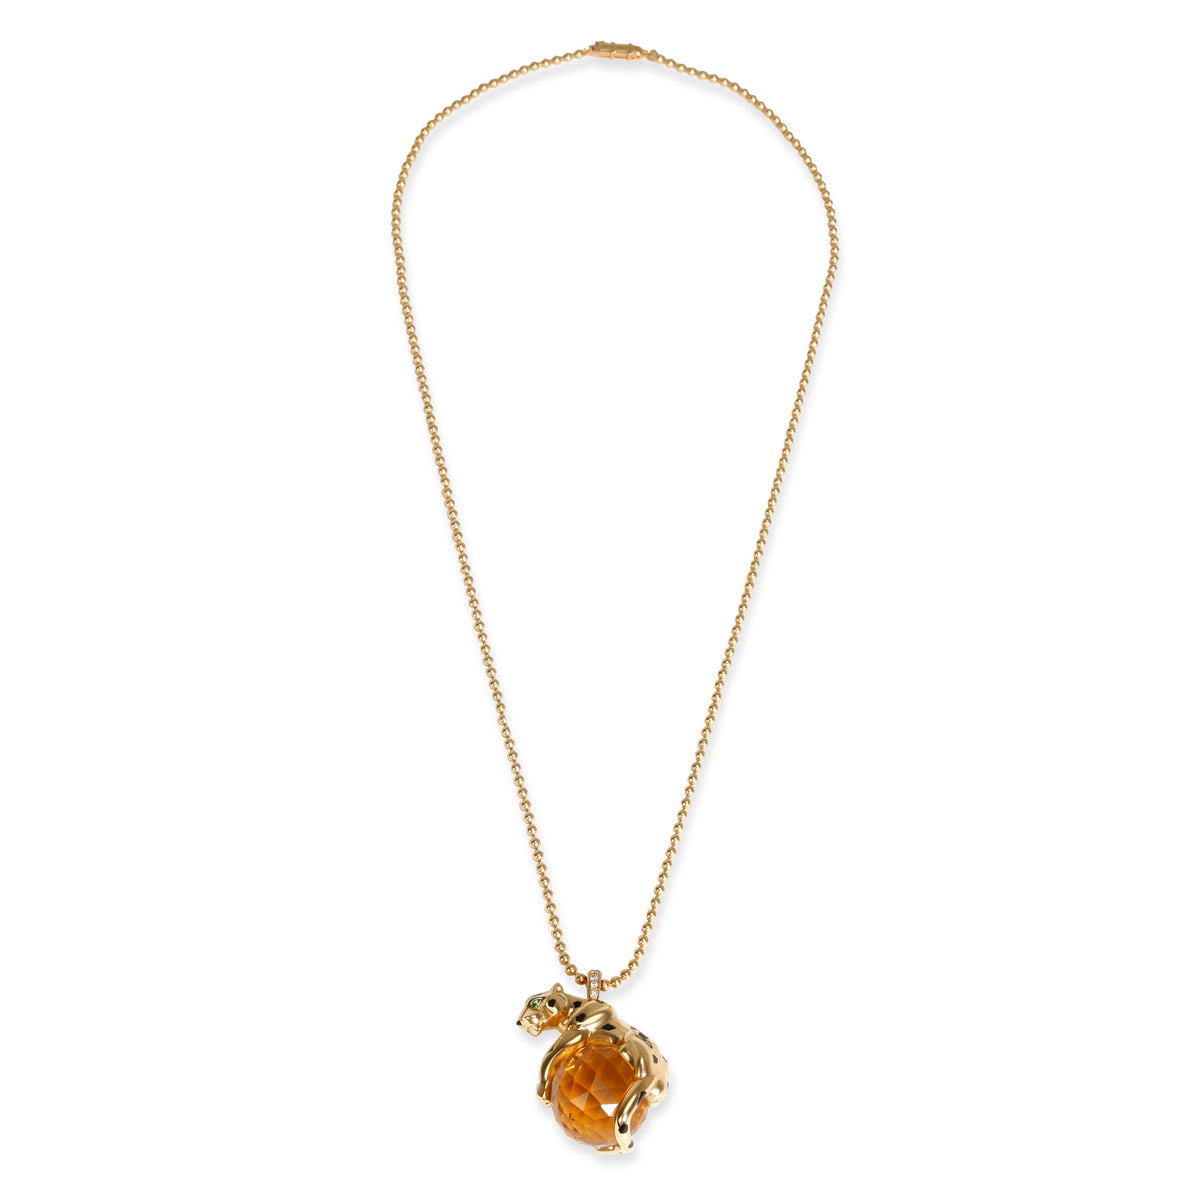 Cartier Panthere Citrine, Lacquer, Tsavorite & Diamond Necklace in 18KT Gold